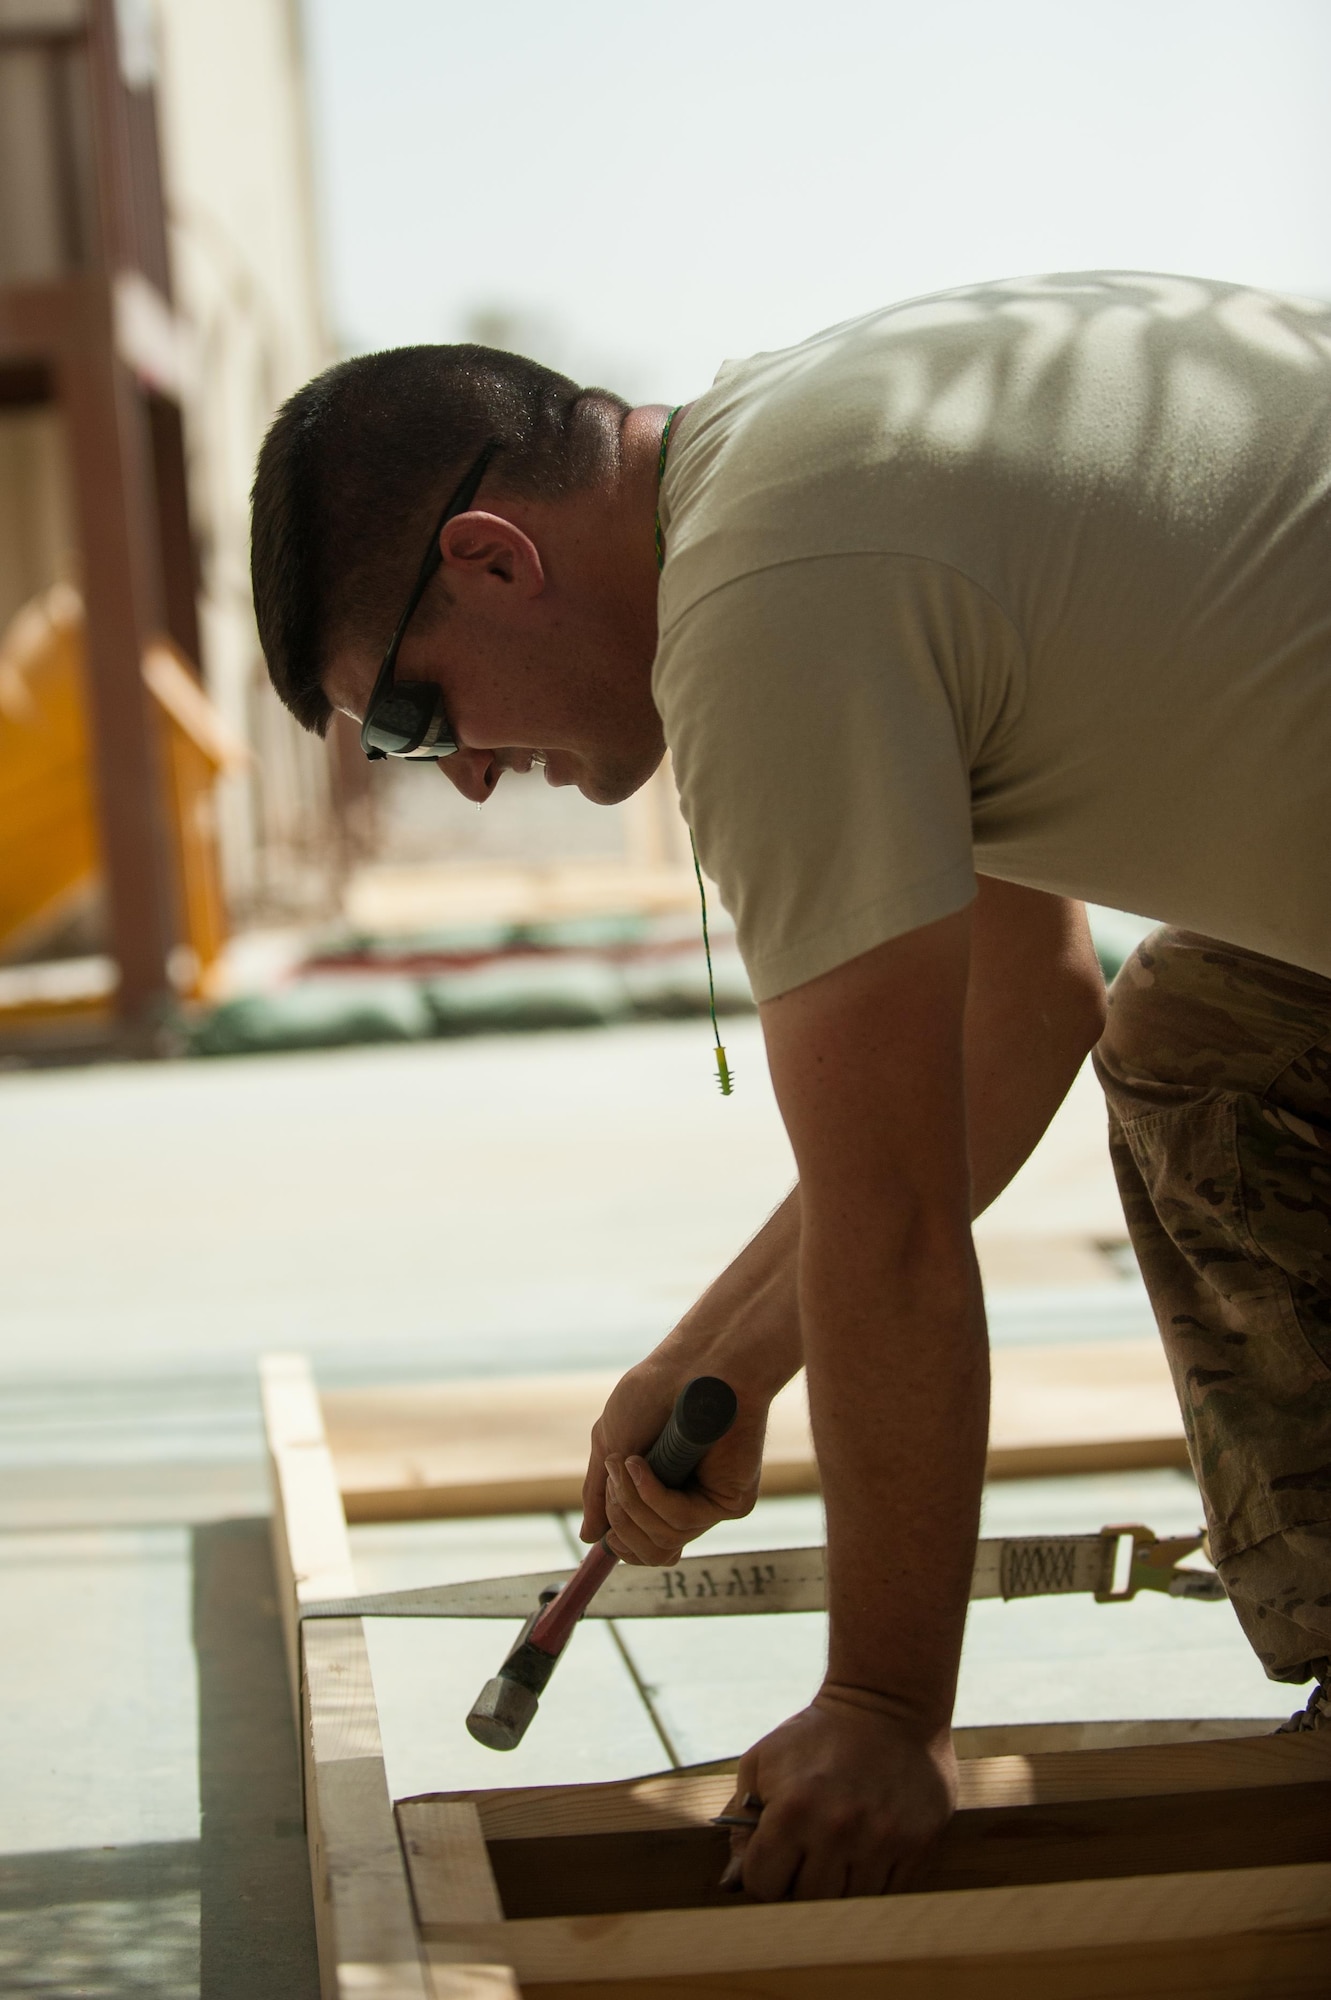 U.S. Air Force Tech. Sgt. Dallan Livingston, 451st Expeditionary Support Squadron Central Command Material Recovery Element air transportation specialist, builds a set of stairs for a defensive fighting position at Kandahar Airfield, Afghanistan, Aug. 15, 2015.  Livingston has been using his carpentry skills during his spare time to build projects to better KAF. (U.S. Air Force photo by Tech. Sgt. Joseph Swafford/Released)